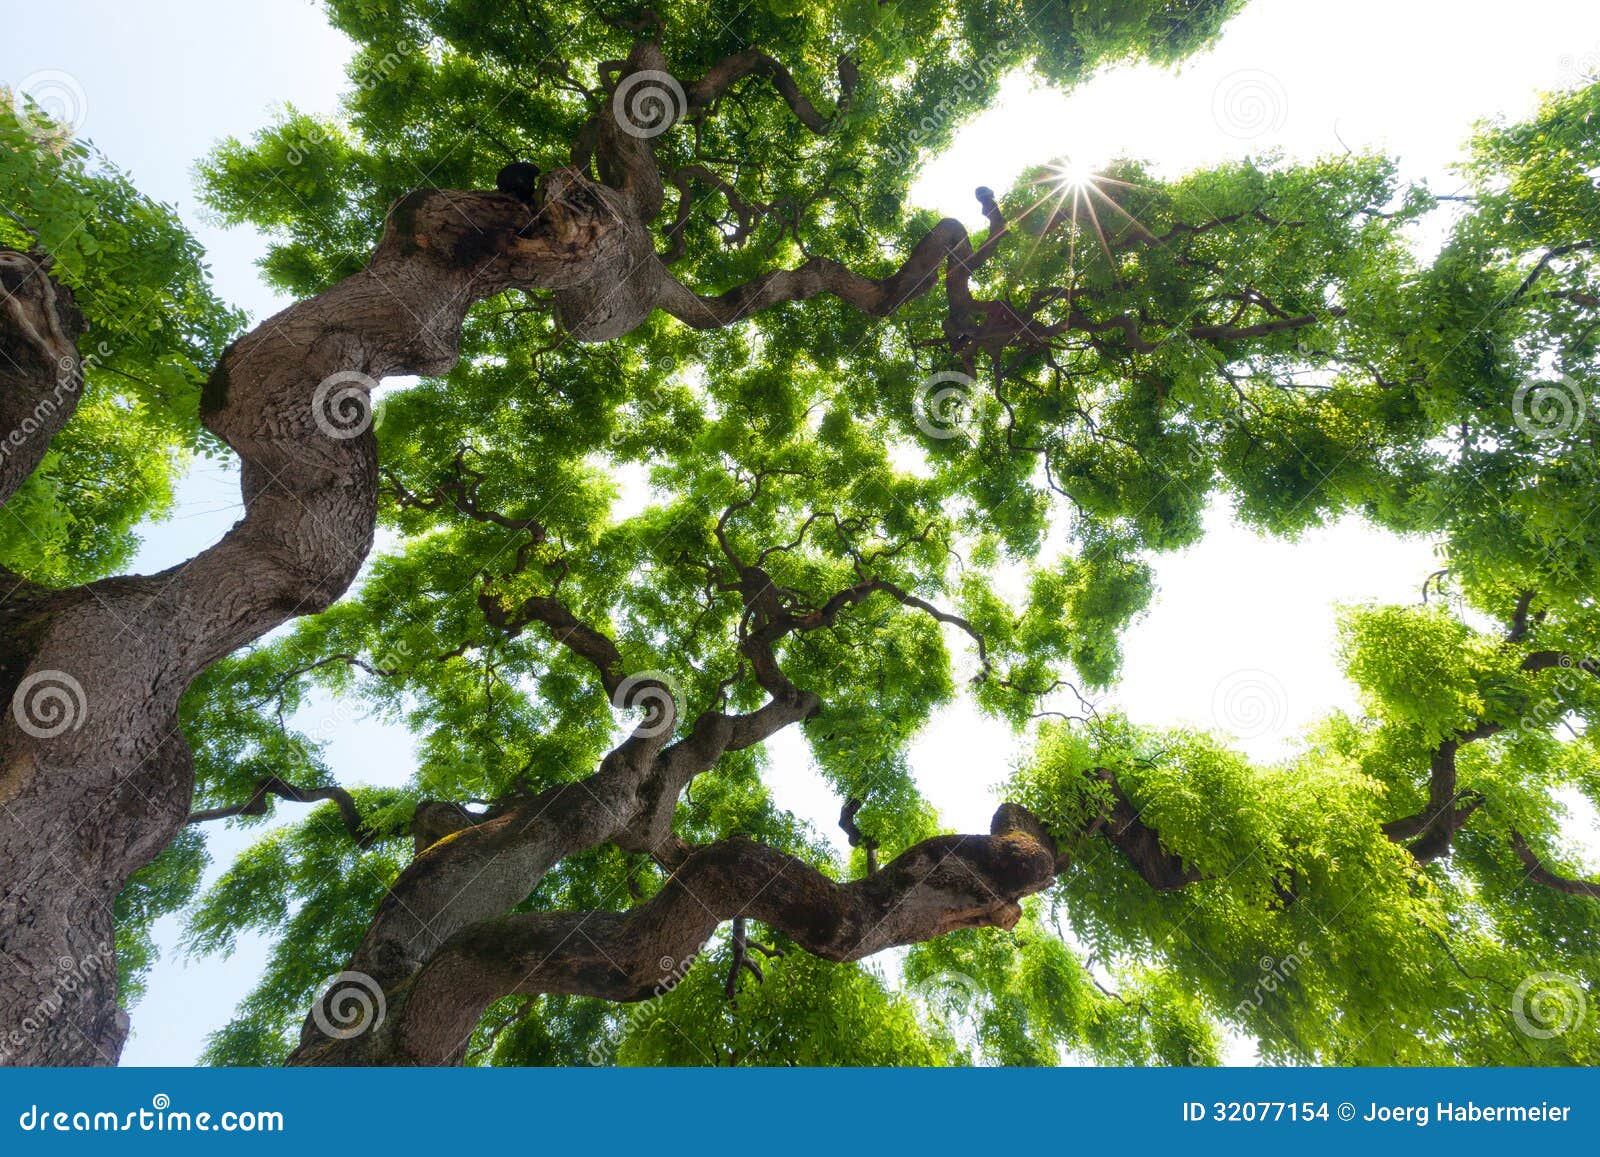 majestic, green crown of tall, large elm tree with gnarled, twisted branches